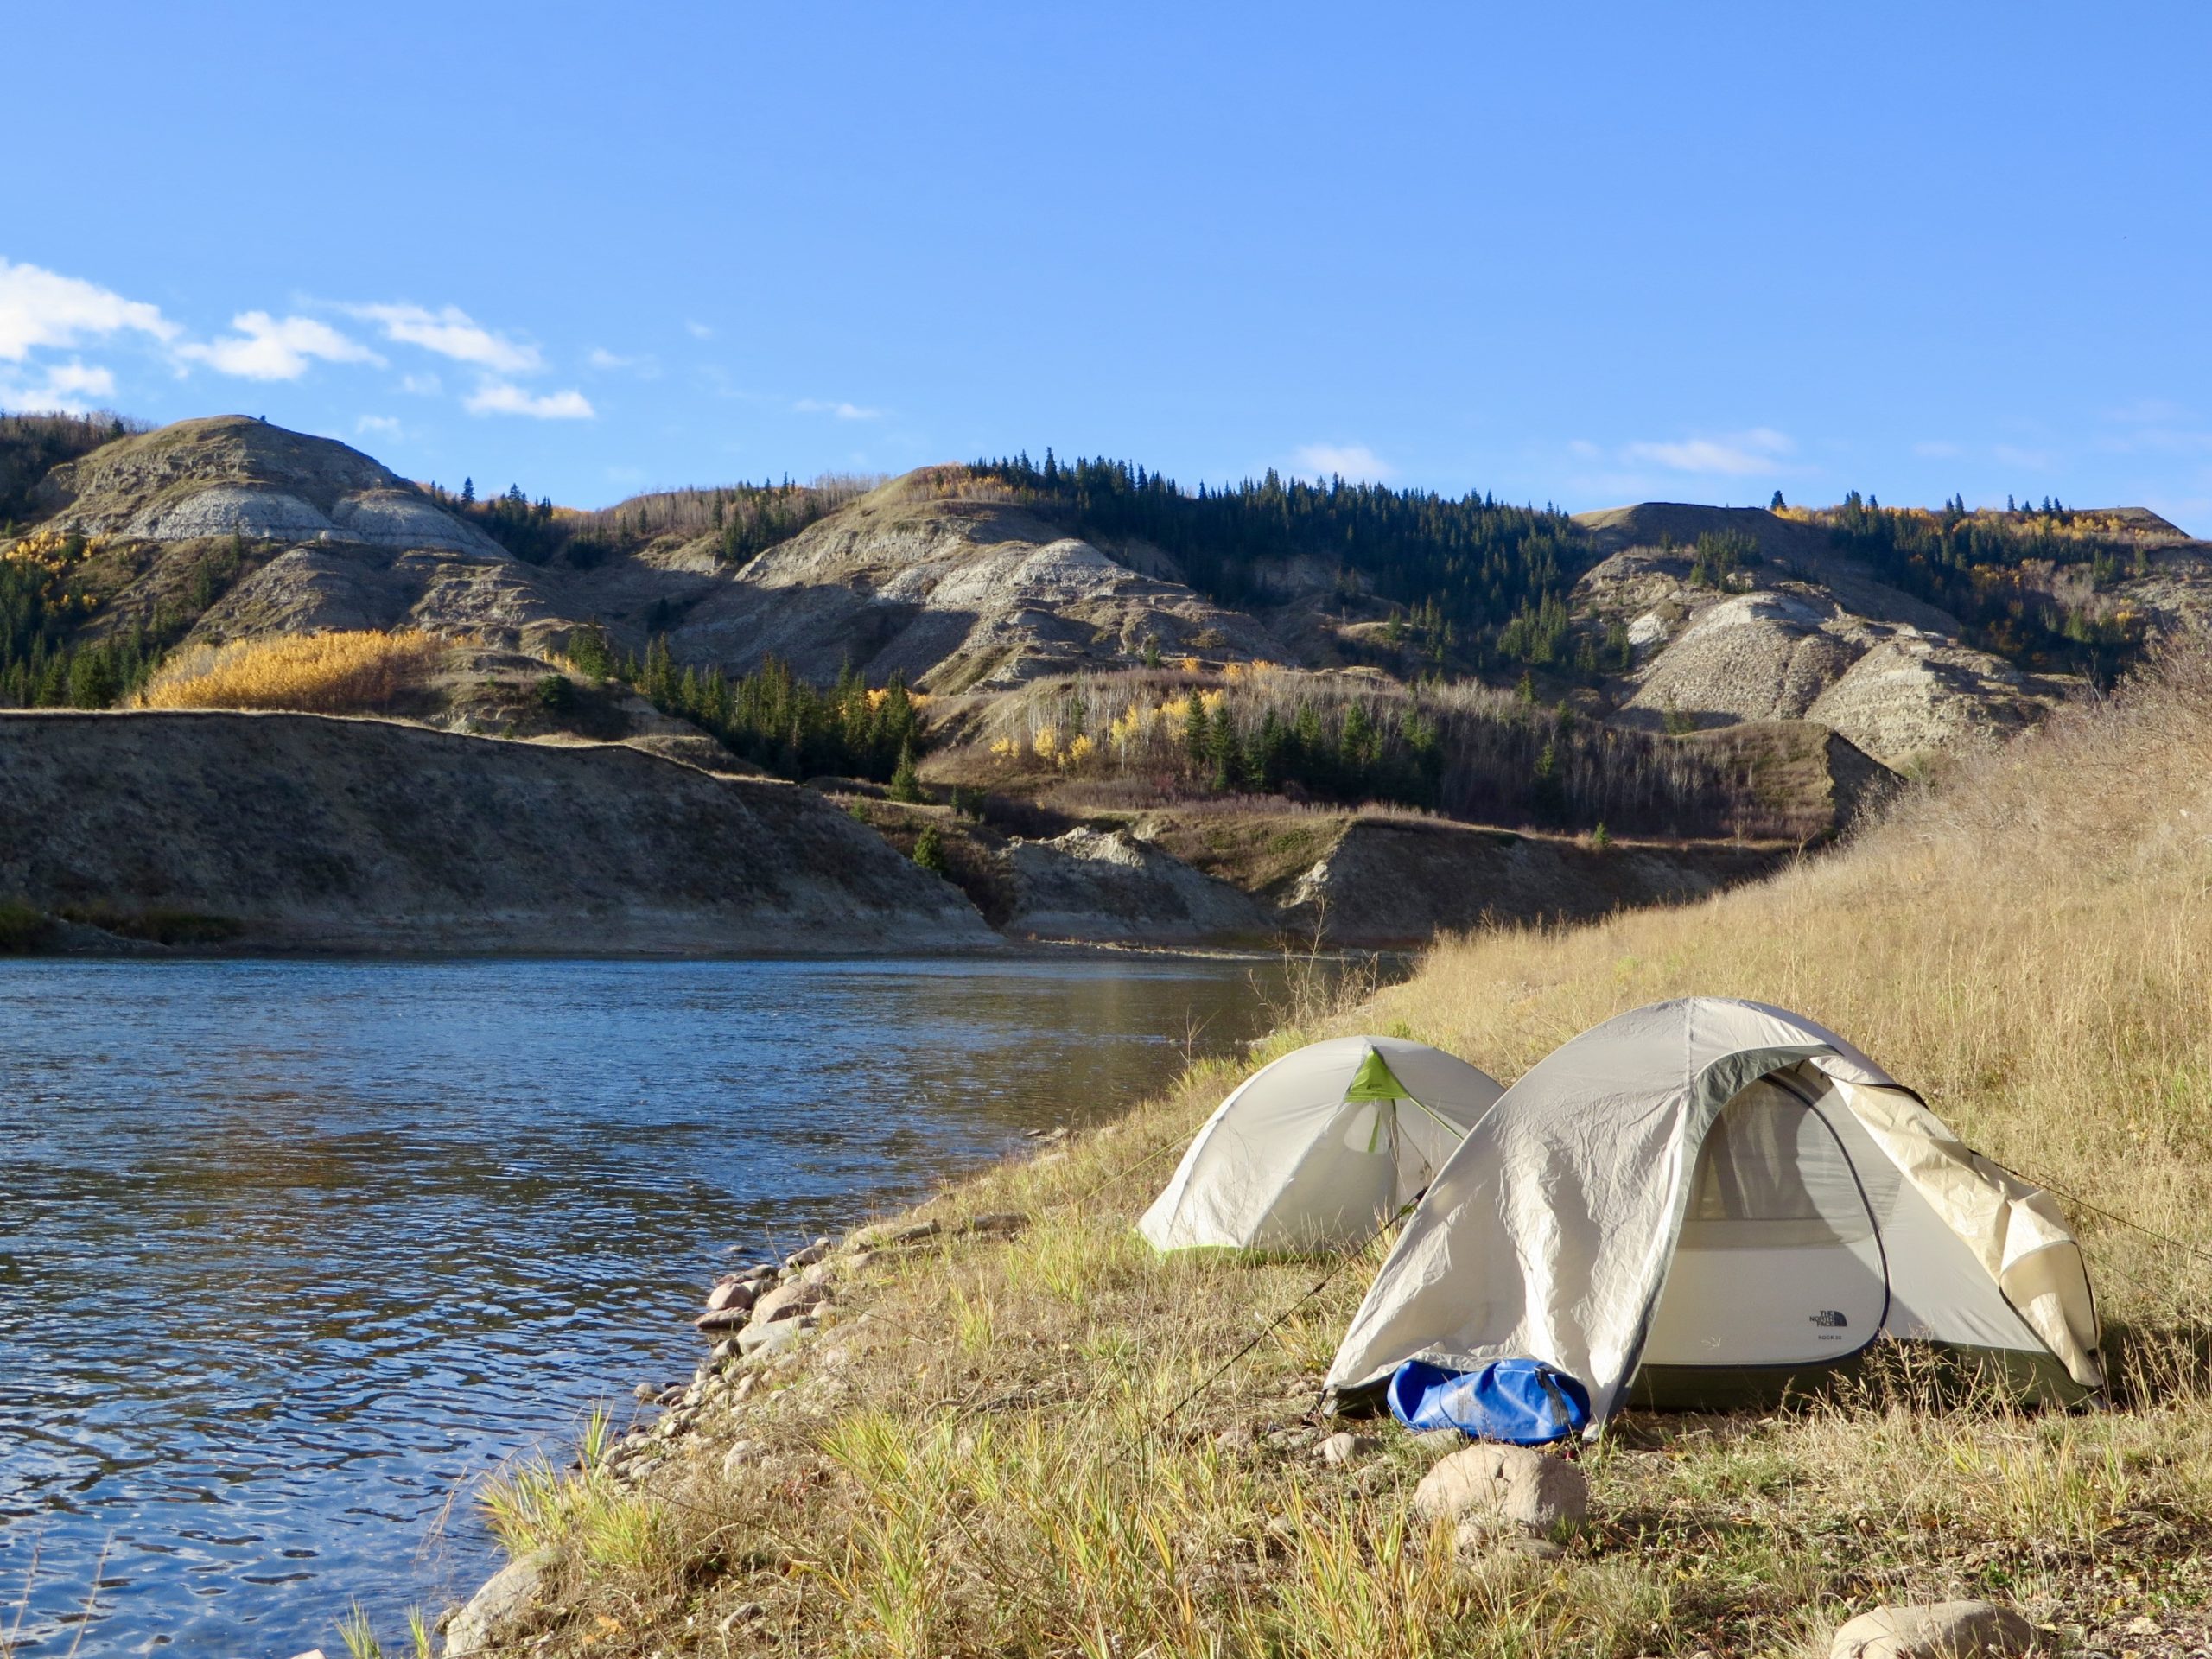 Two tents set up on grassy area beside river with fall colours on trees across the way.